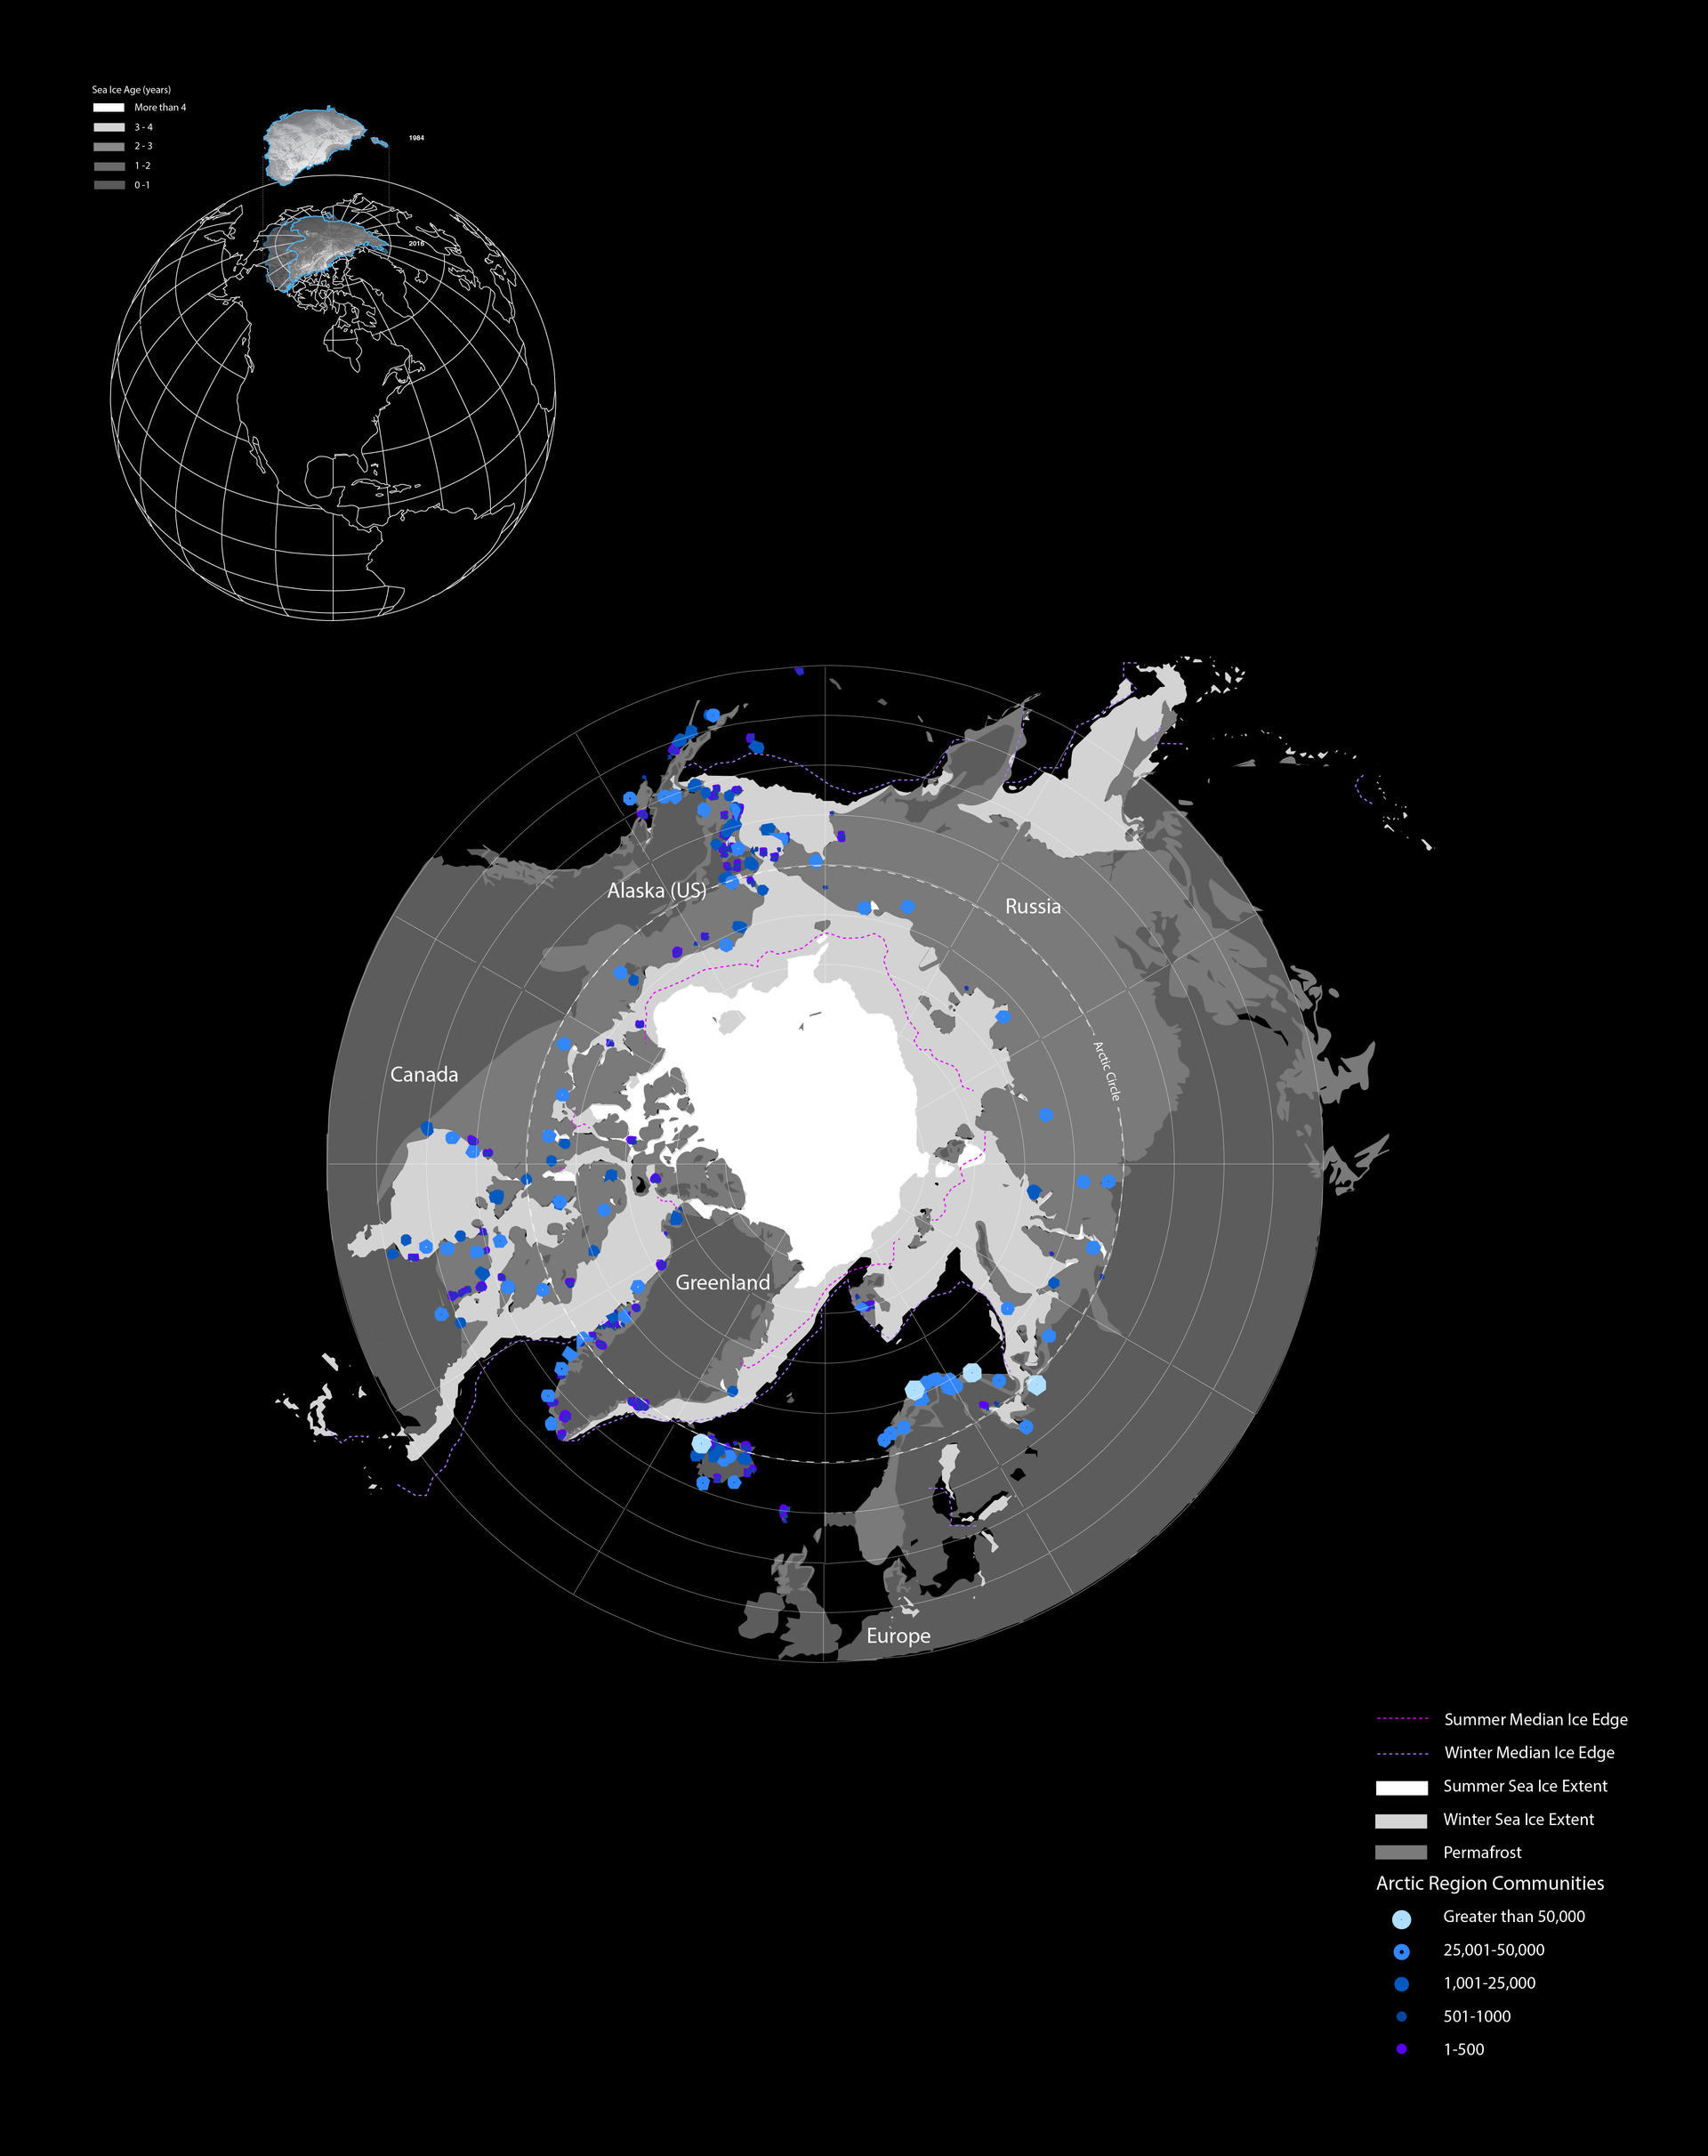 This image encapsulates the escalating repercussions of global warming, particularly the accelerated melting of Arctic sea ice. This ecological transformation is profoundly impacting the predominantly Indigenous villages that inhabit the Arctic region. As the polar amplification effect intensifies, these communities are facing increasingly profound environmental shifts and challenges.